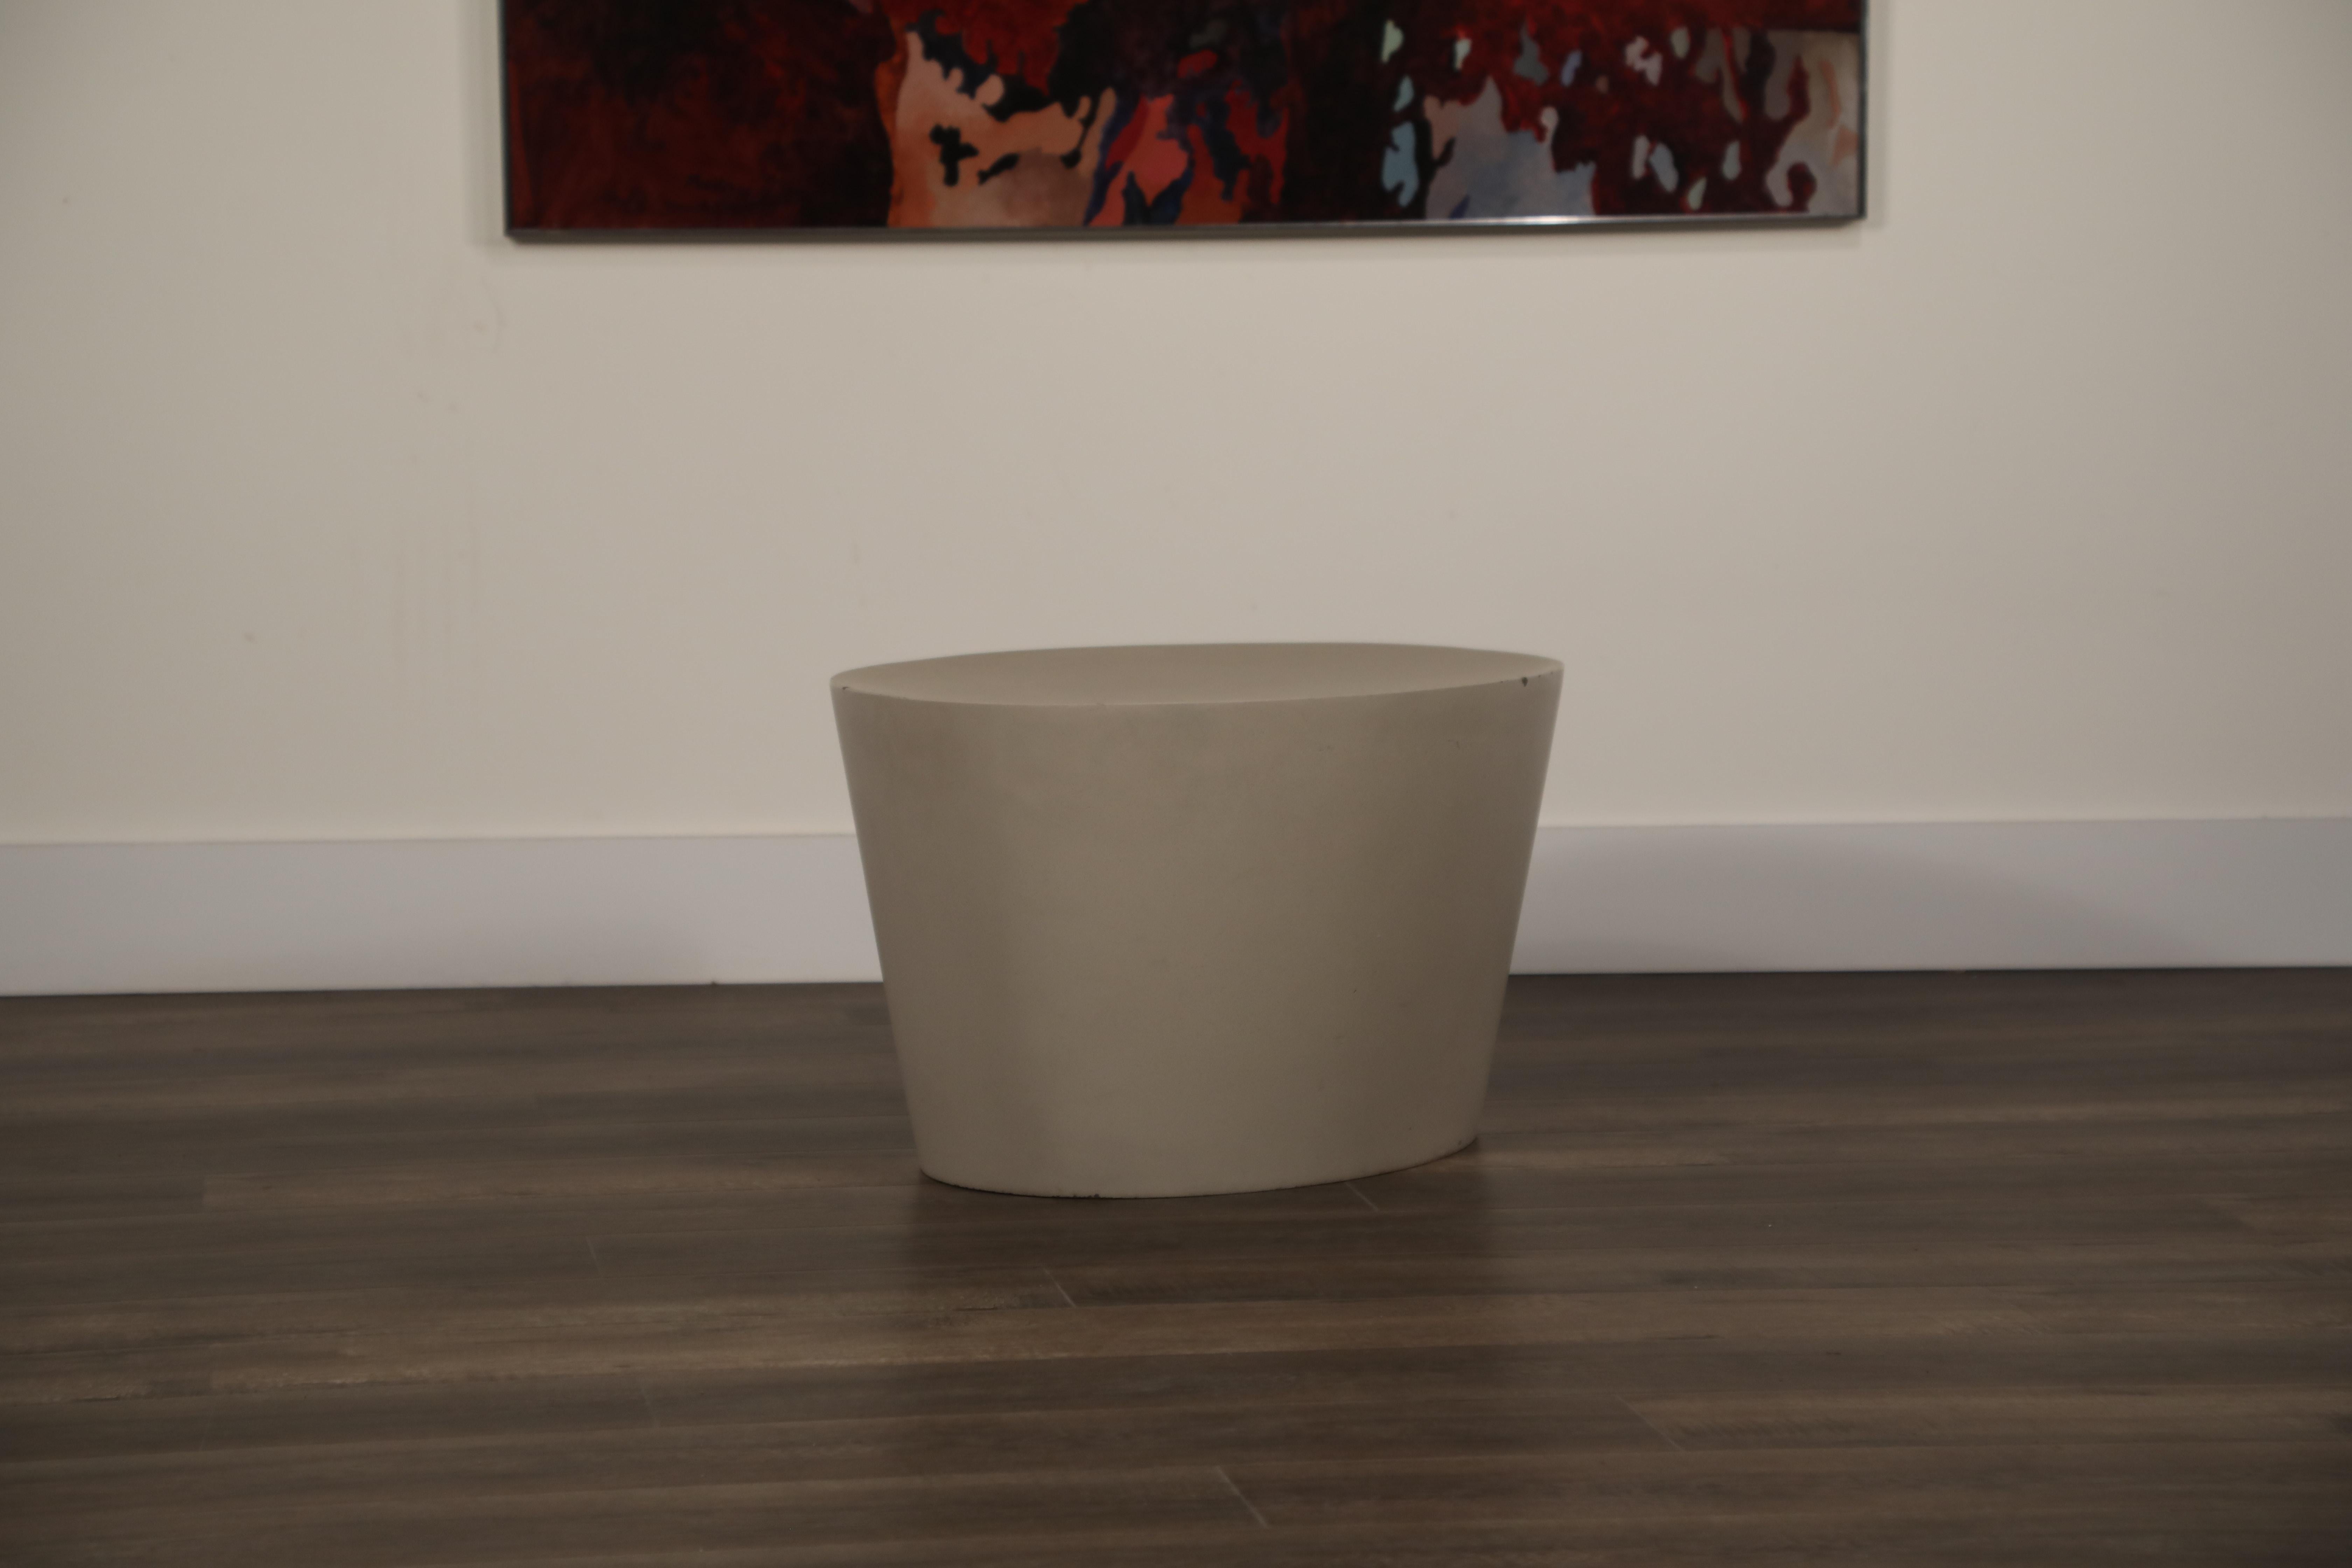 Modern Maya Lin 1st-Generation Concrete Stool for Knoll Studio, Signed and Stamped 1998